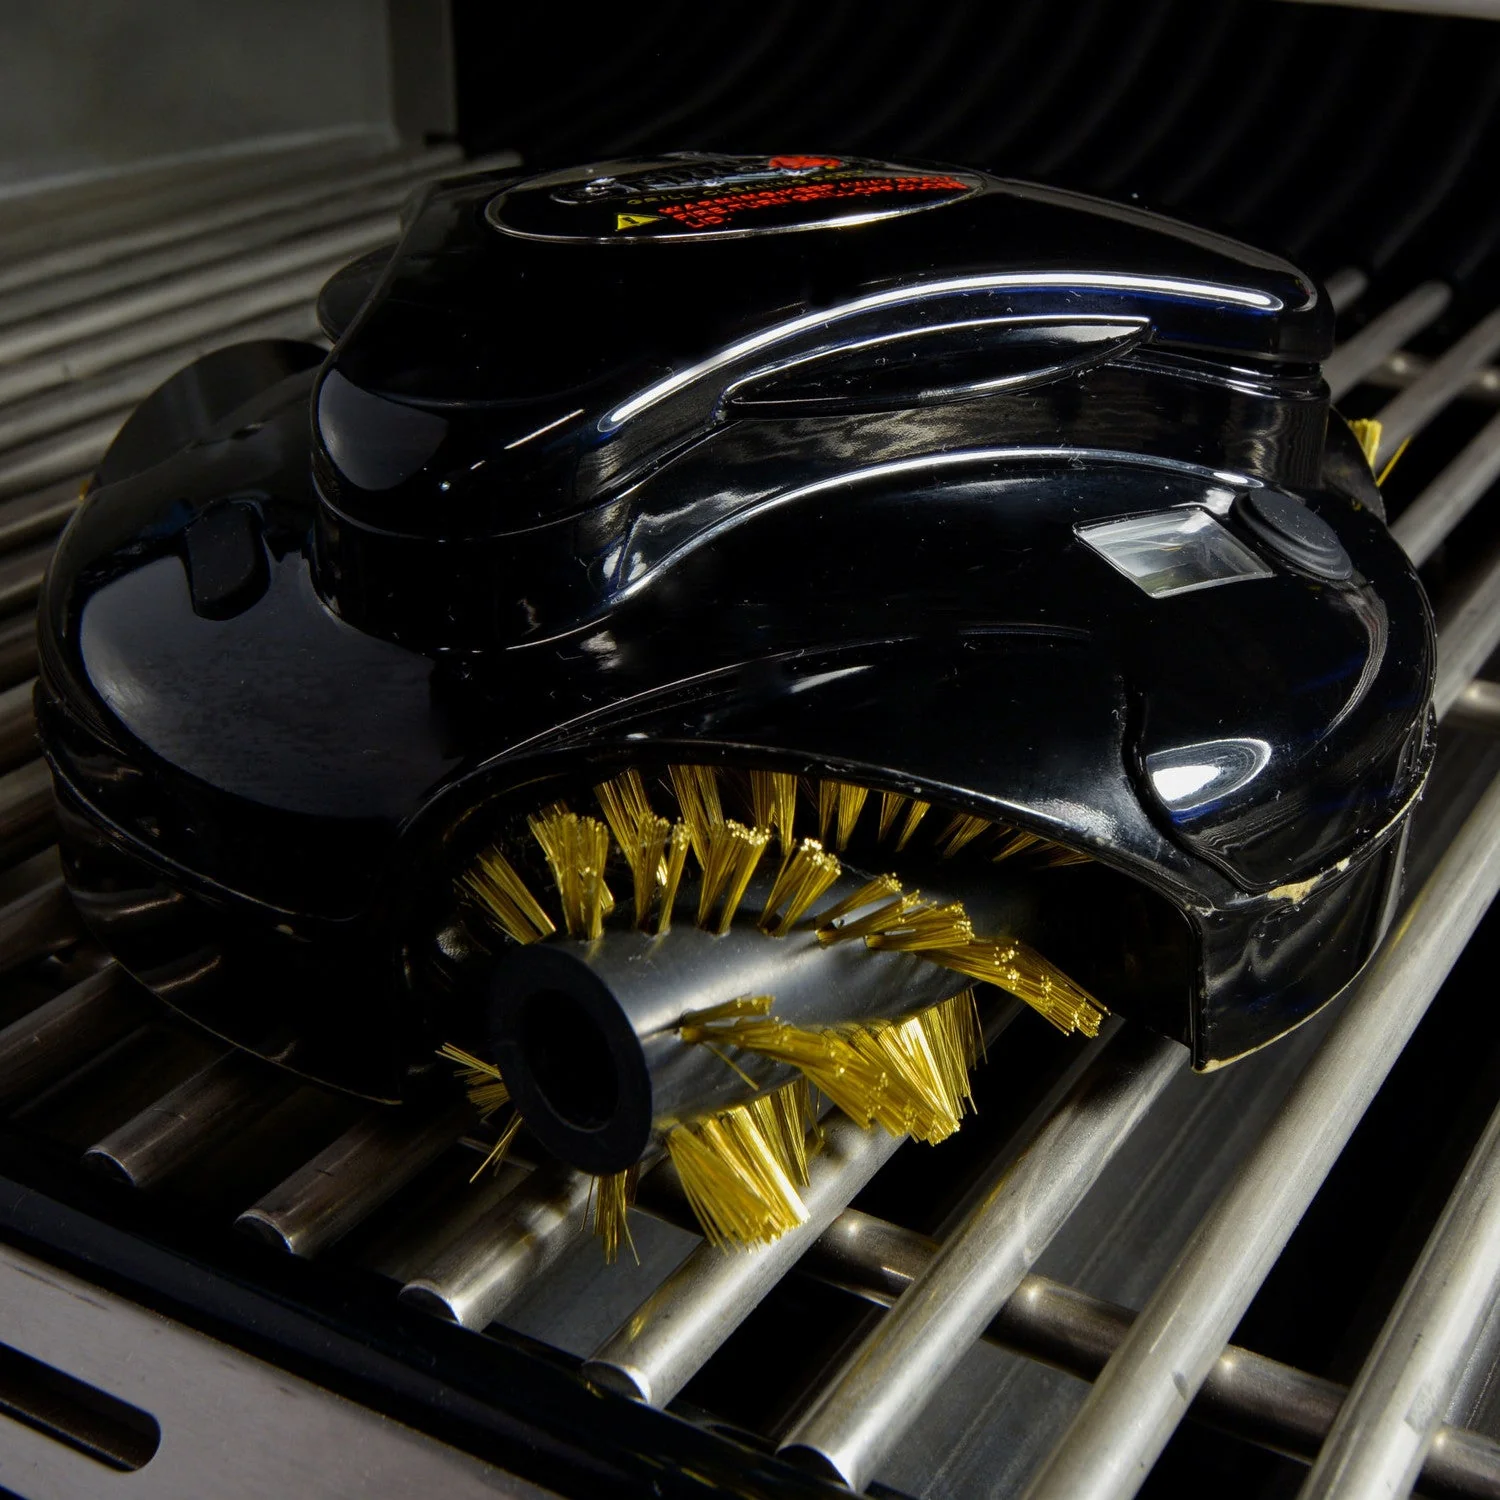 Automatic Grill Cleaning Grillbot